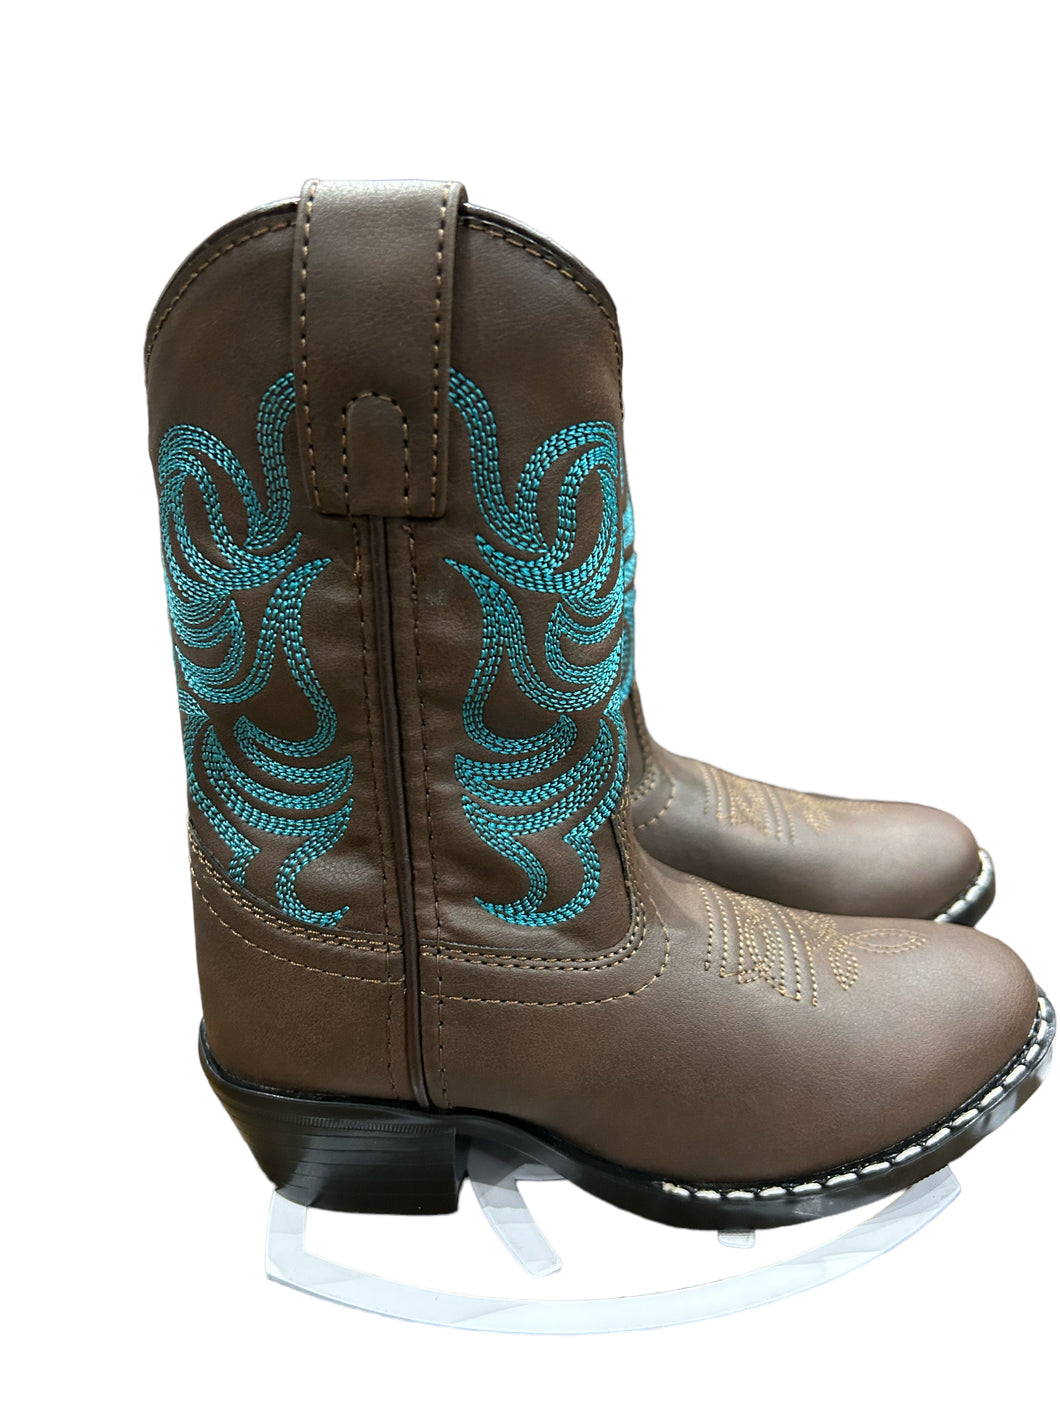 Smoky Mountain Boots 1623C Monterey Brown/Blue Western Childrens Boots